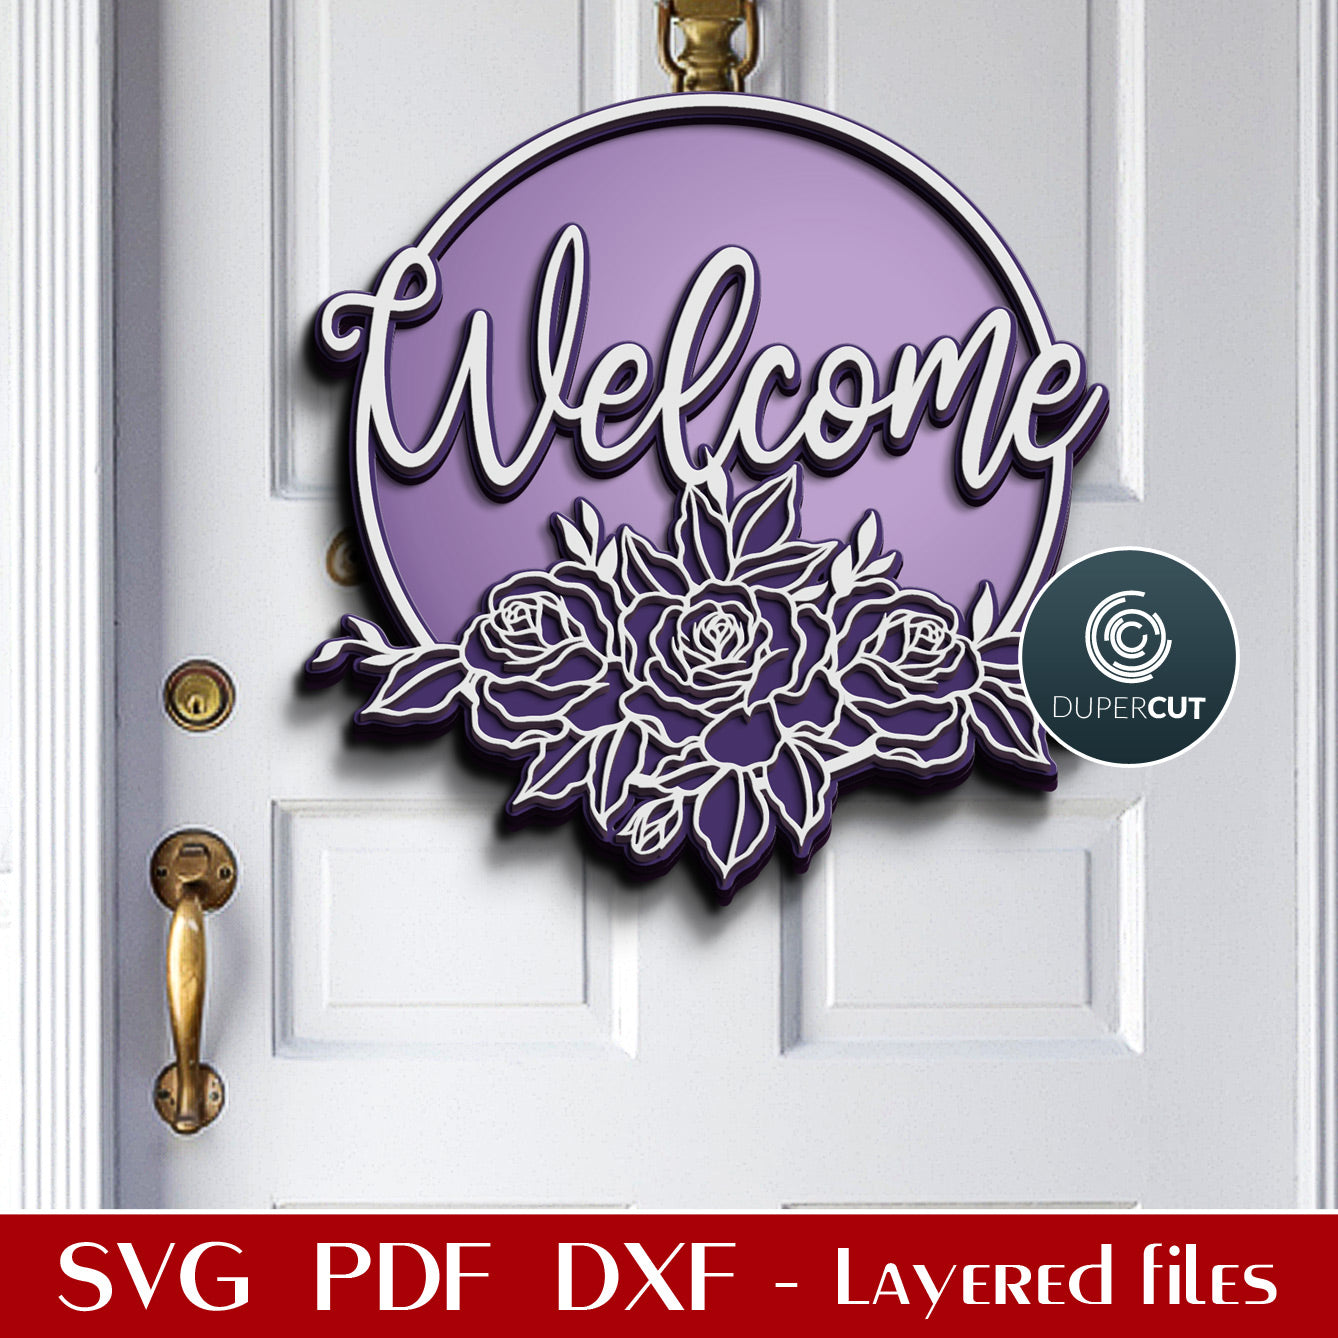 Floral welcome sign door hanger template - SVG DXF vector files pattern for Glowforge, Cricut, Silhouette, CNC plasma machines by DuperCut.com